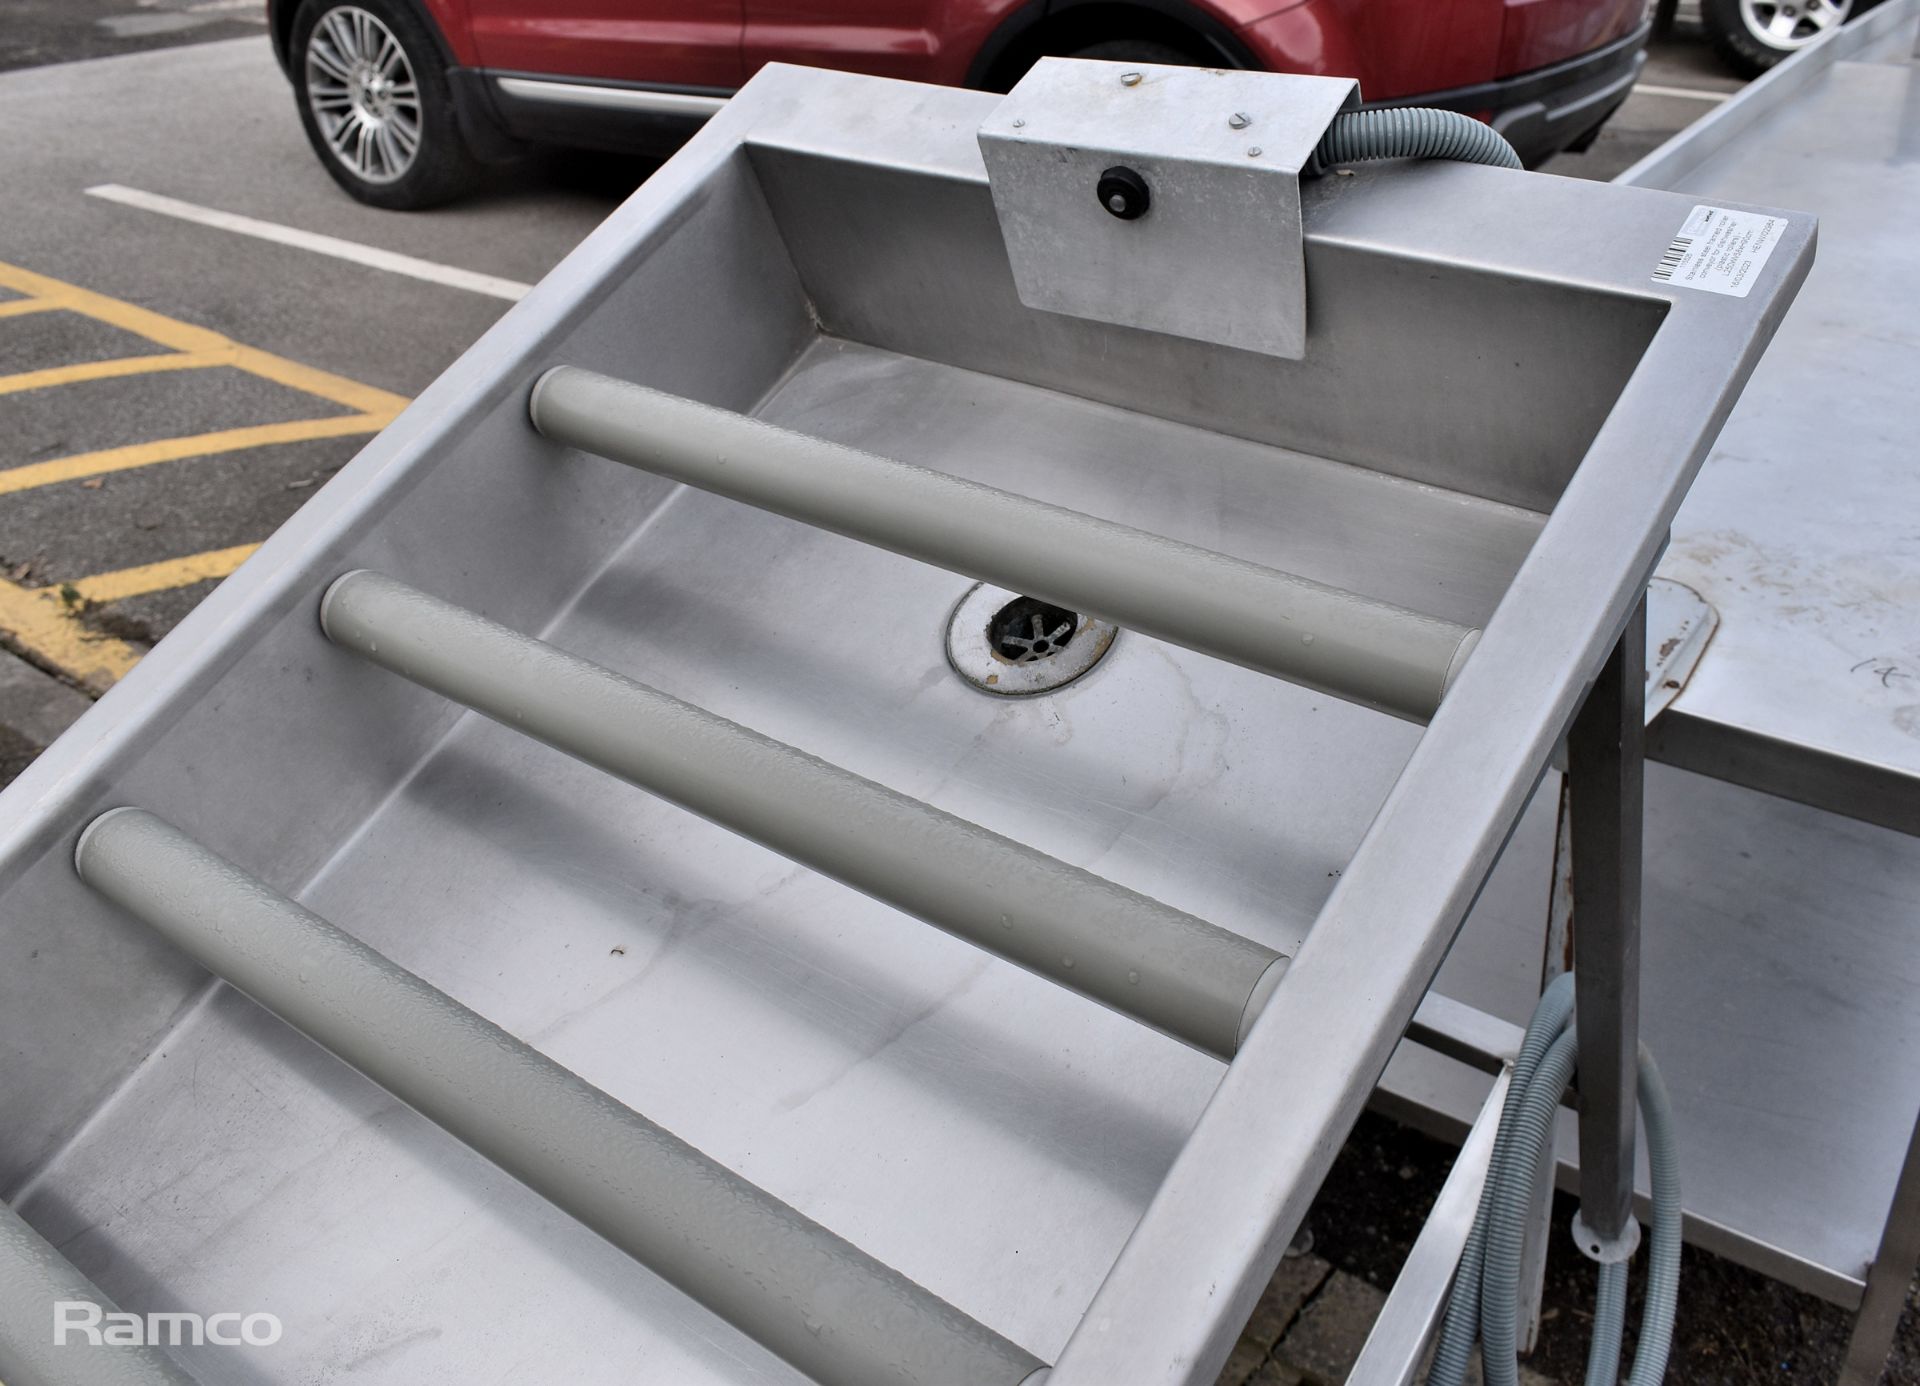 Stainless steel framed roller conveyor for dishwasher (plastic rollers) - L 250 x W 58 x H 90cm - Image 3 of 4